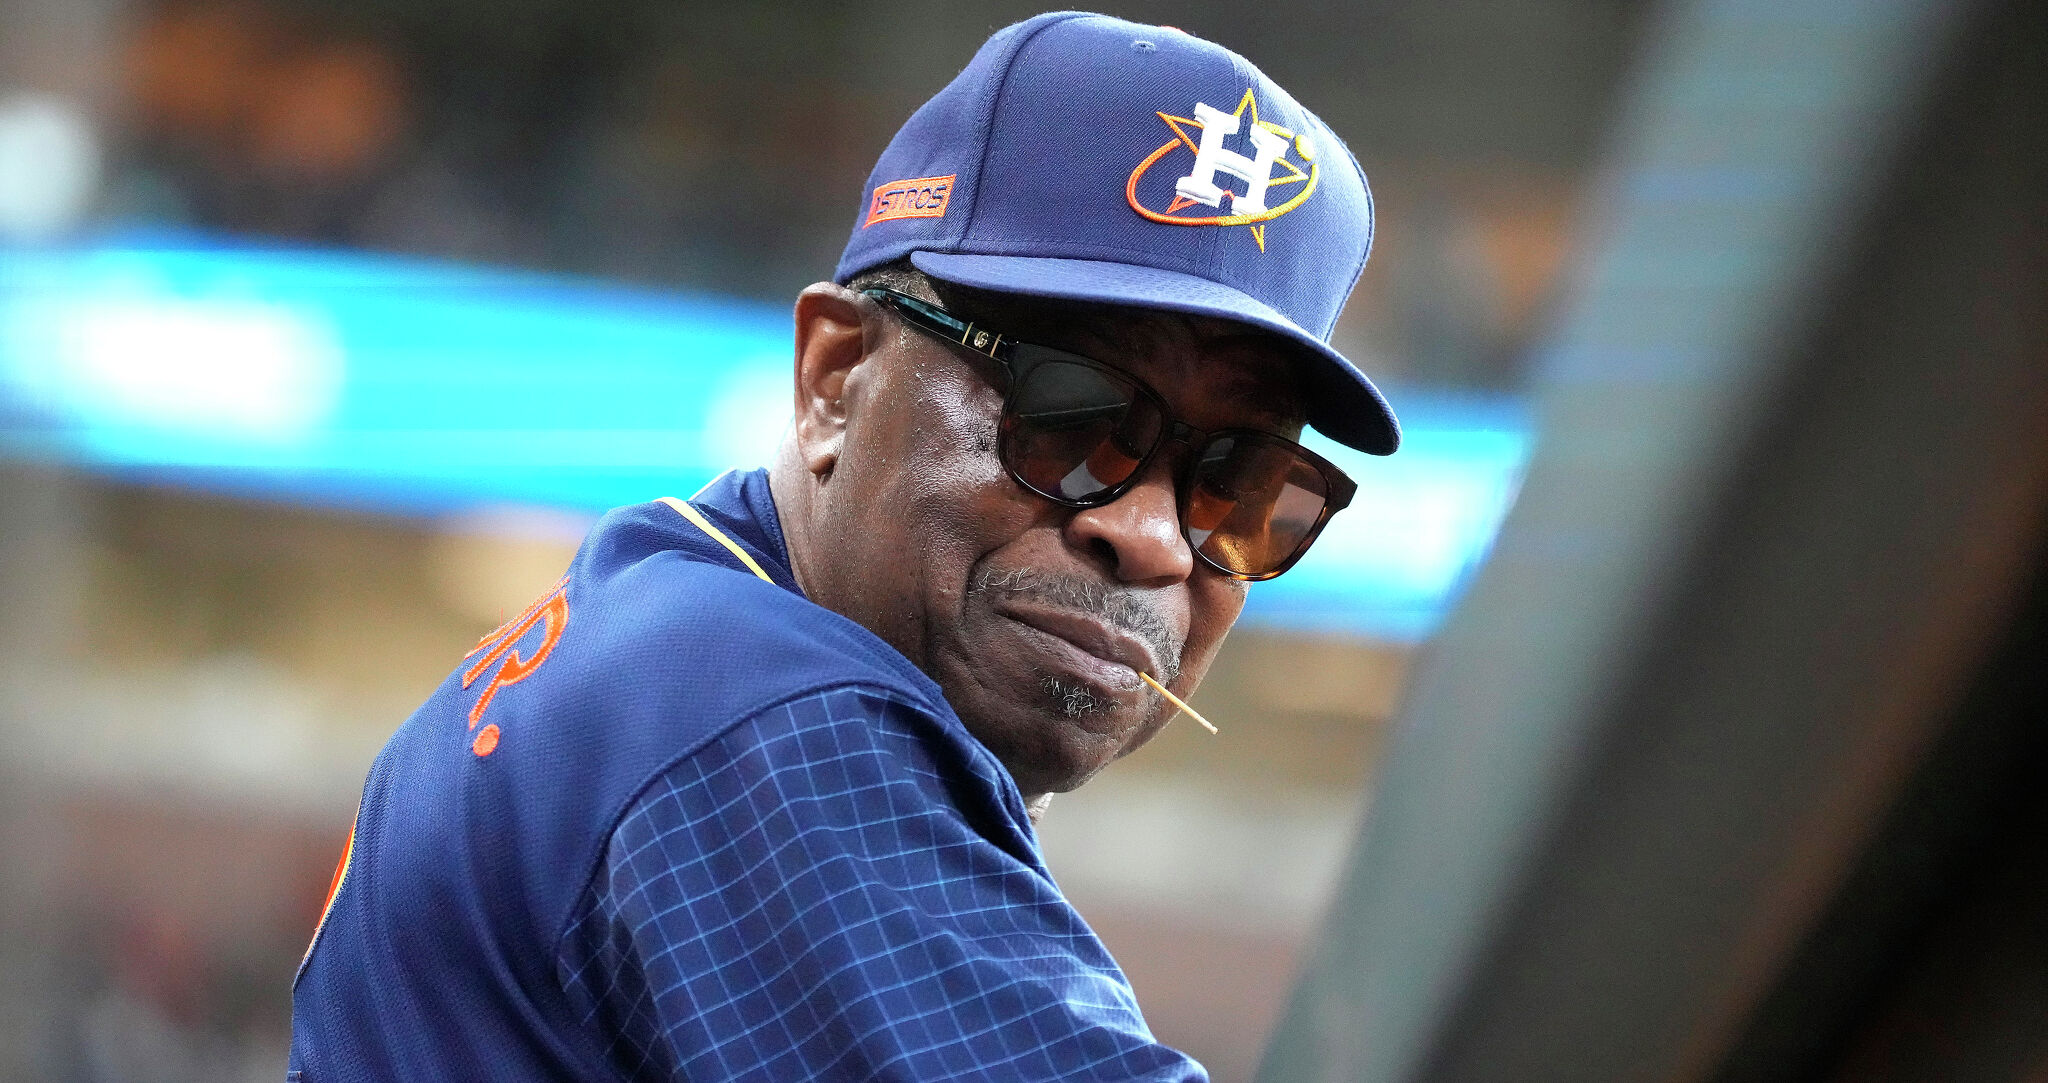 Houston Astros: Manager Dusty Baker back in dugout